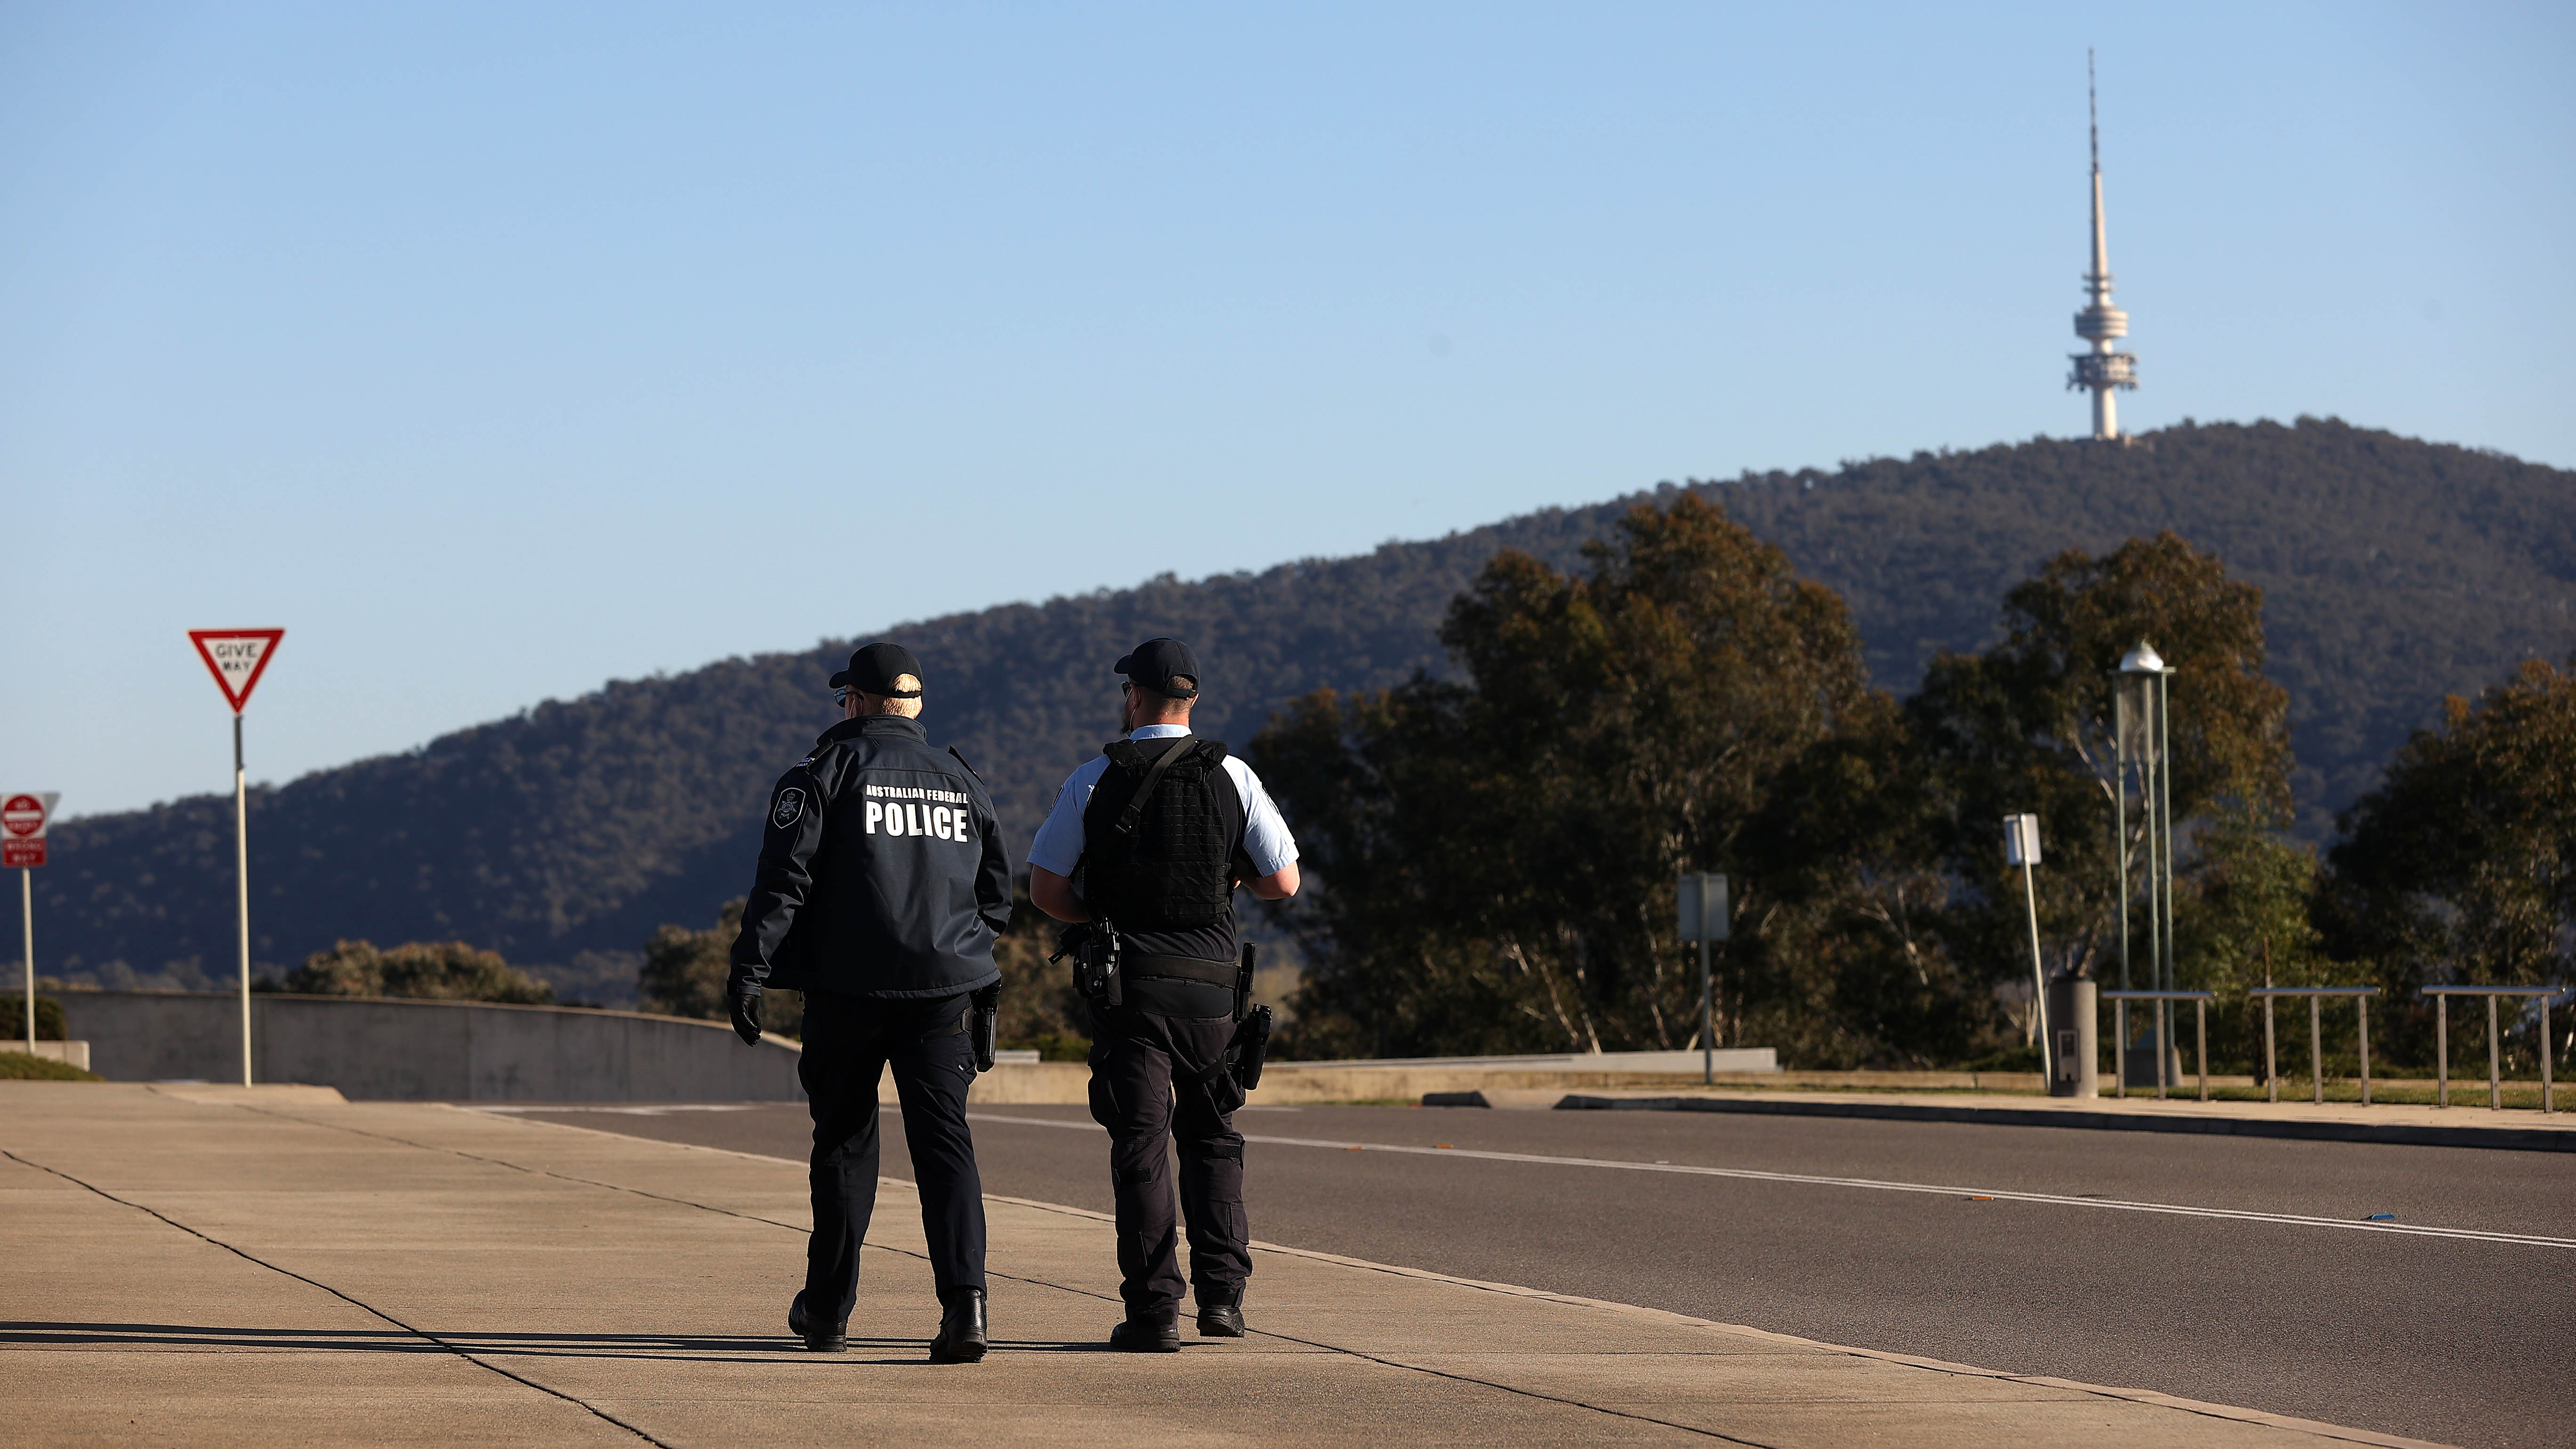 Police patrol around Parliament House in Canberra.